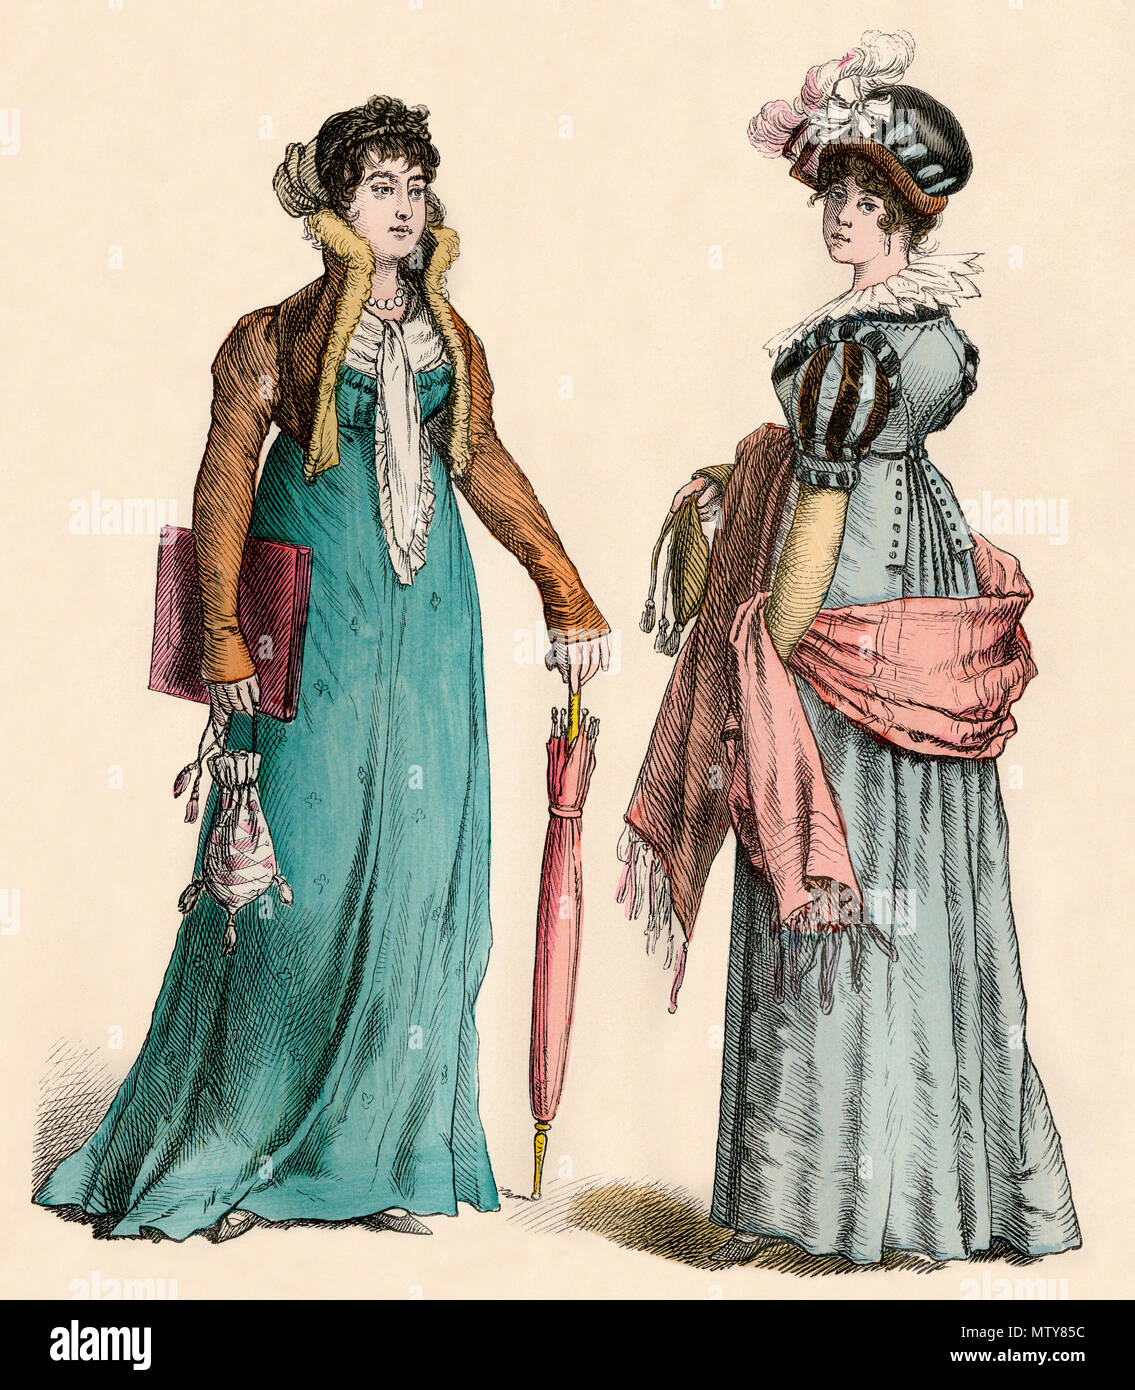 European women's fashion, early 1800s. Hand-colored print Stock Photo